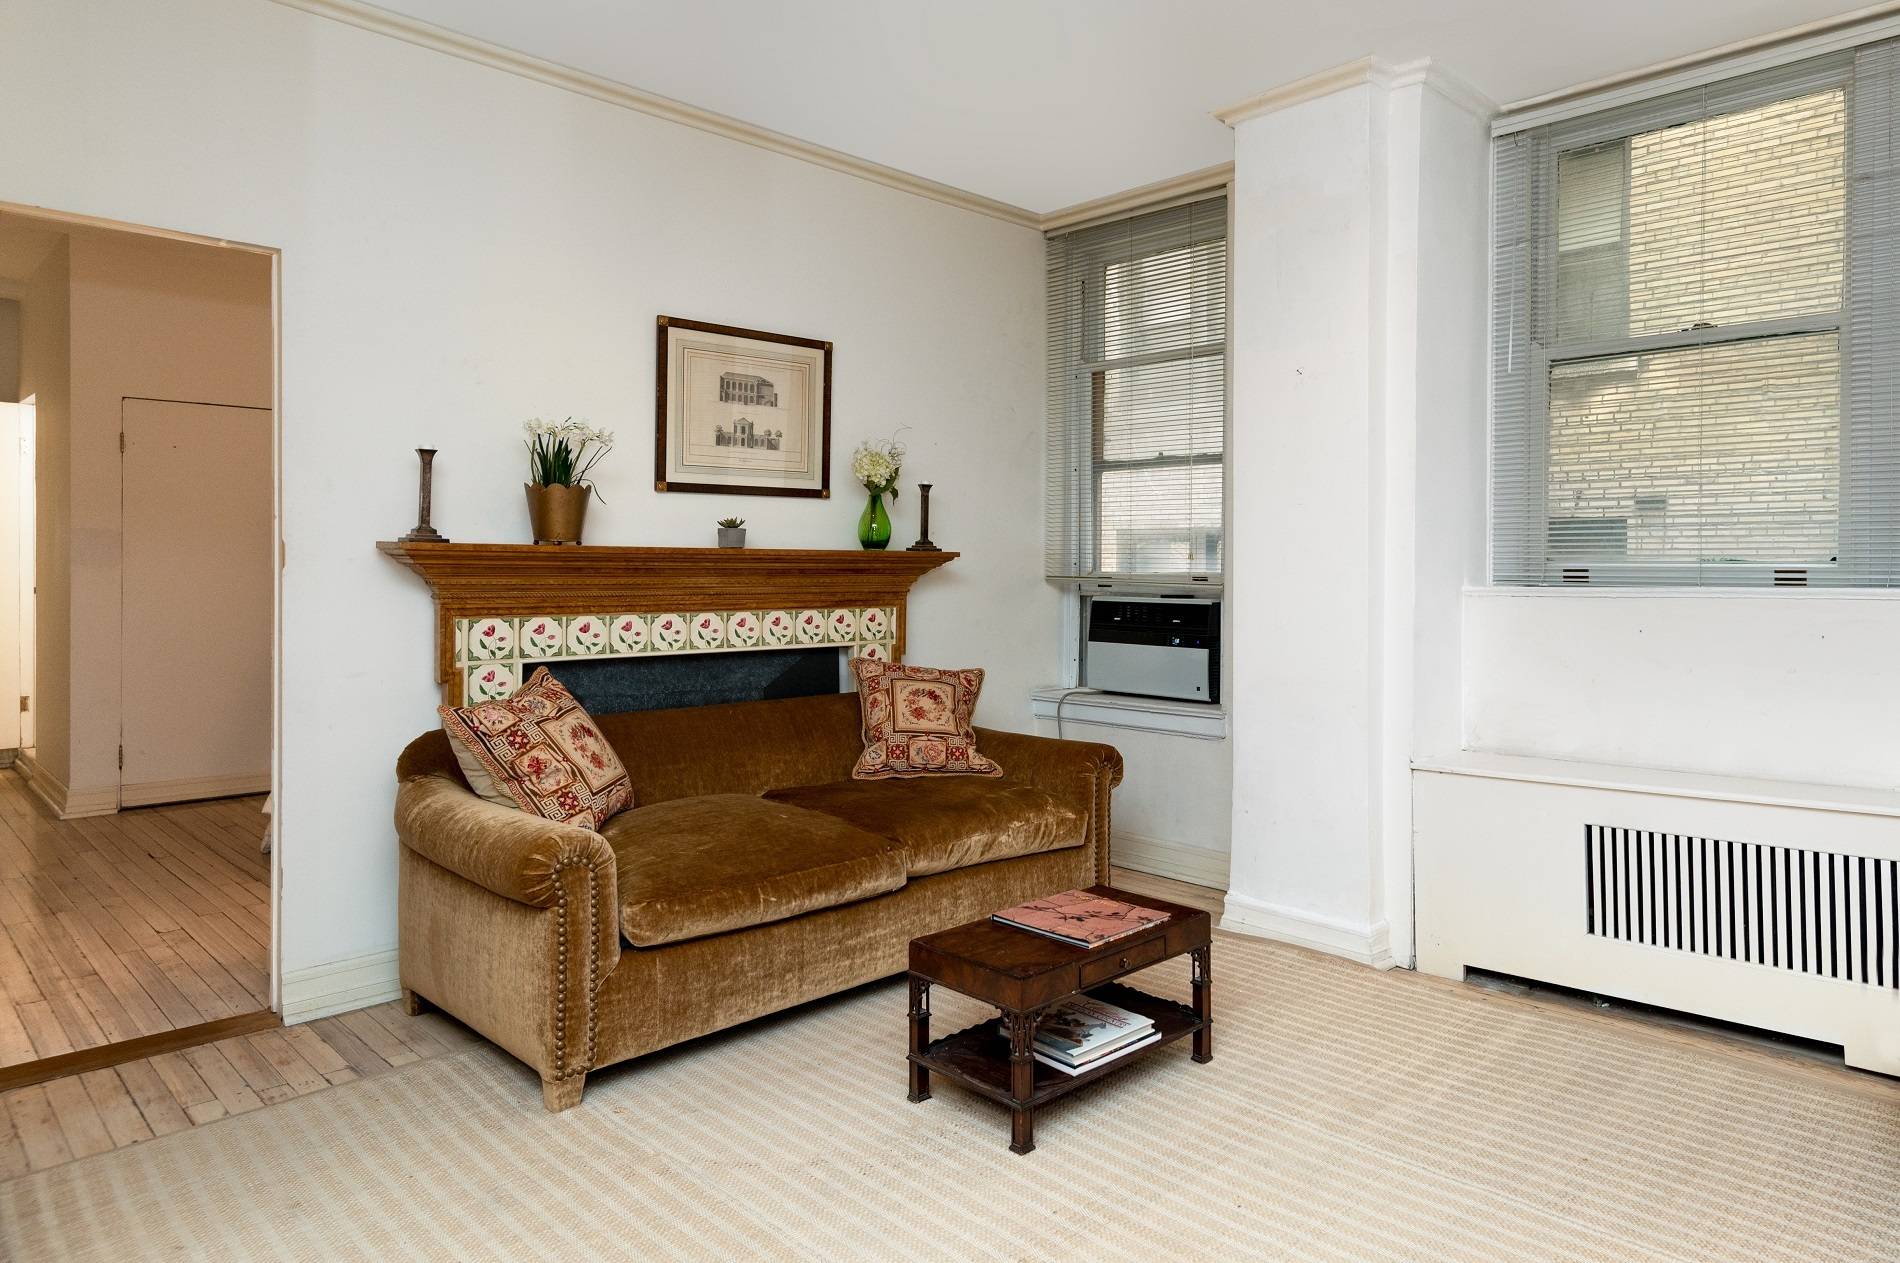 Located steps to Central Park and Museum Mile, this charming apartment is a perfect pied a terre or full time residence.